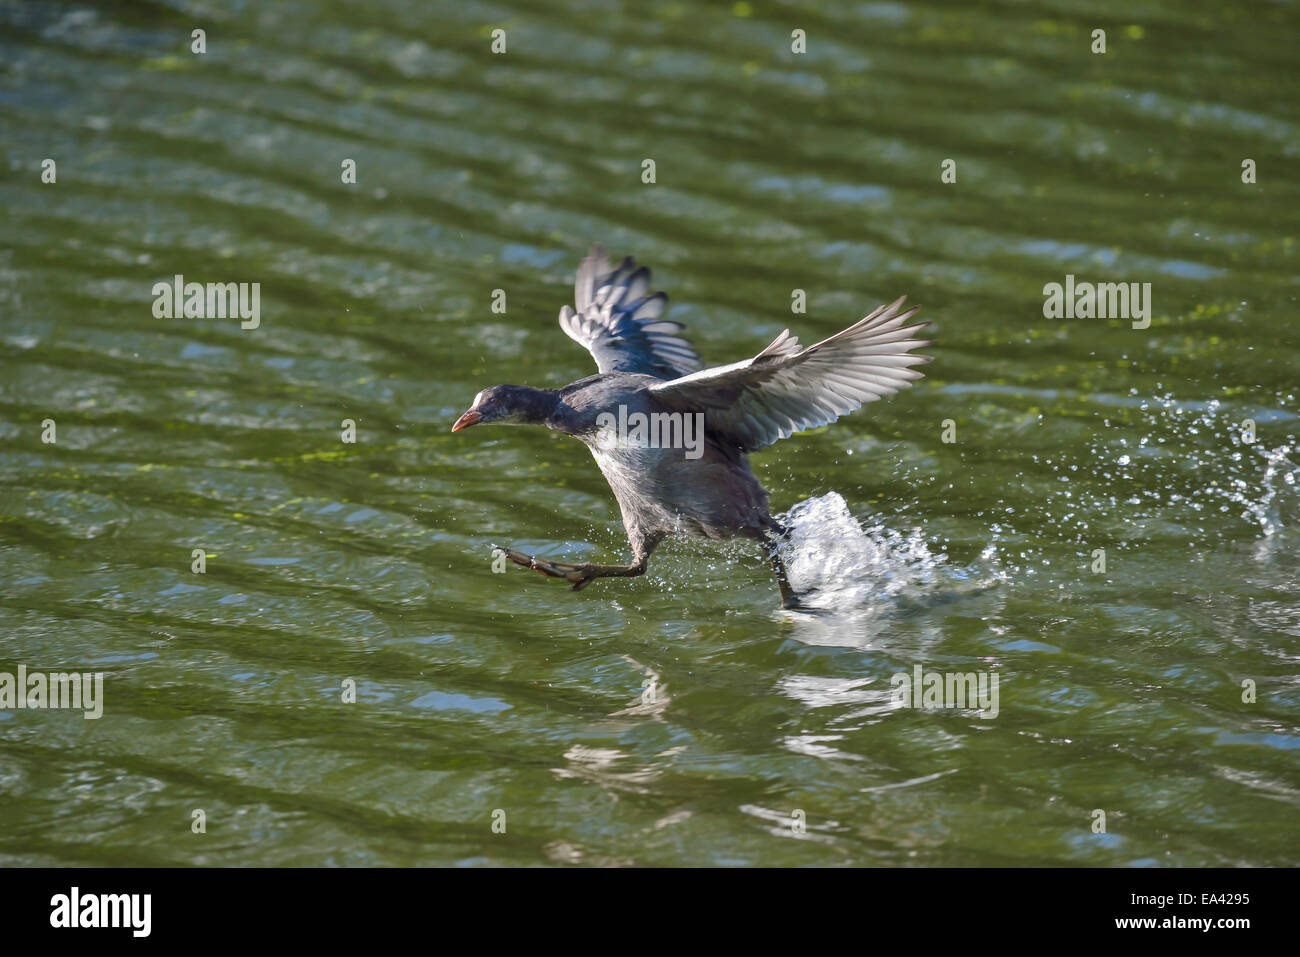 A duck appears to run on water as it prepares for take off. Stock Photo